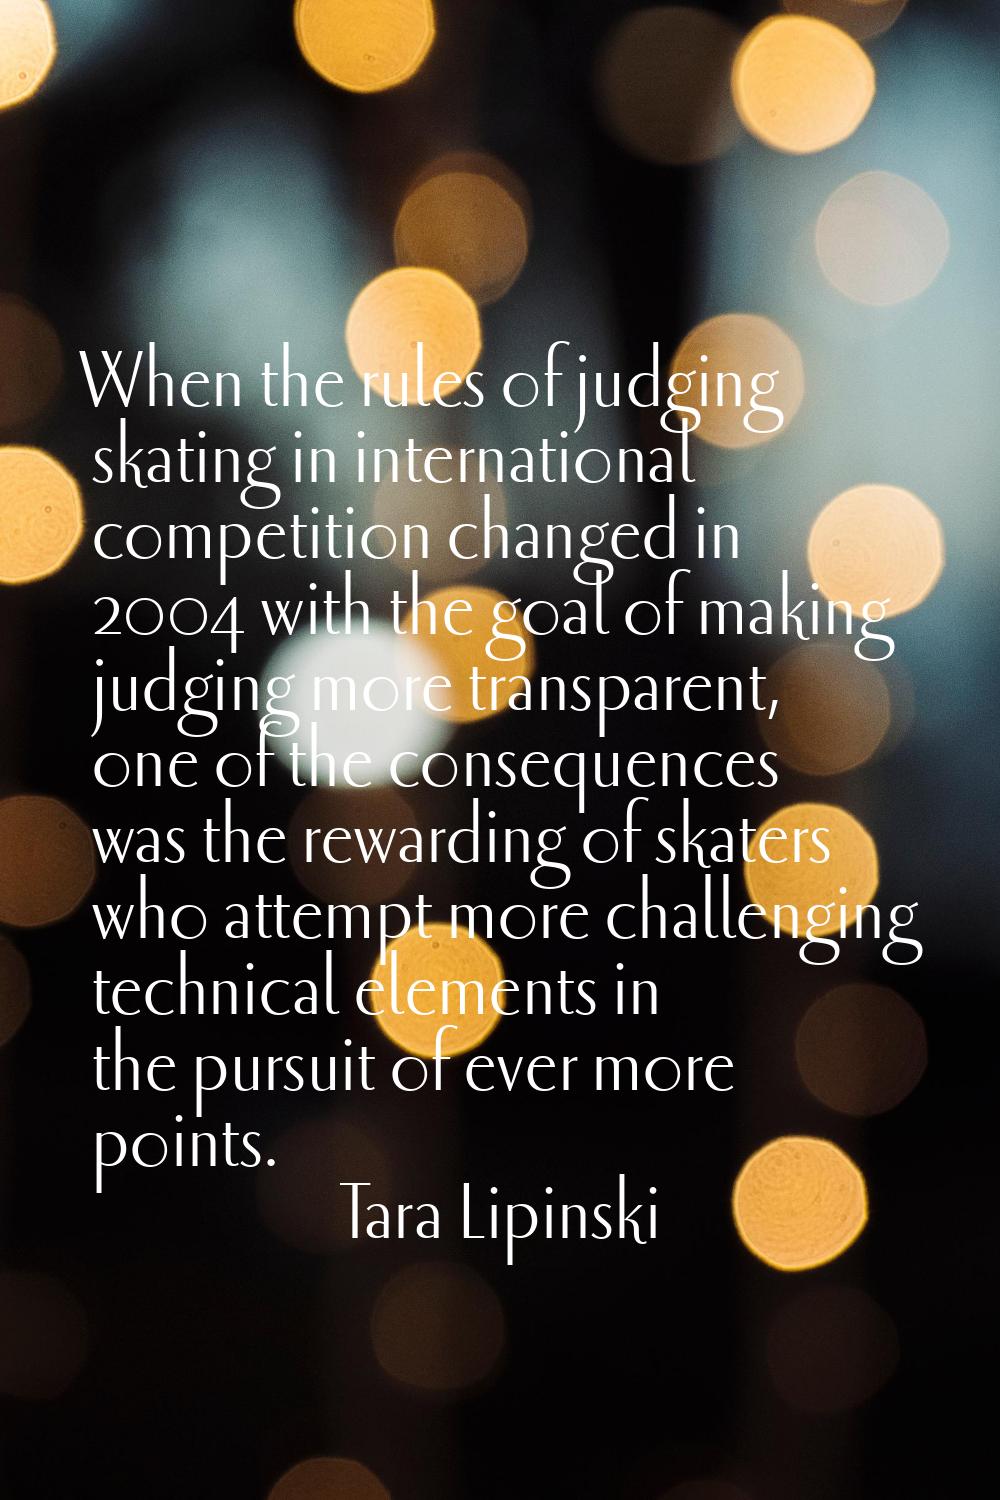 When the rules of judging skating in international competition changed in 2004 with the goal of mak